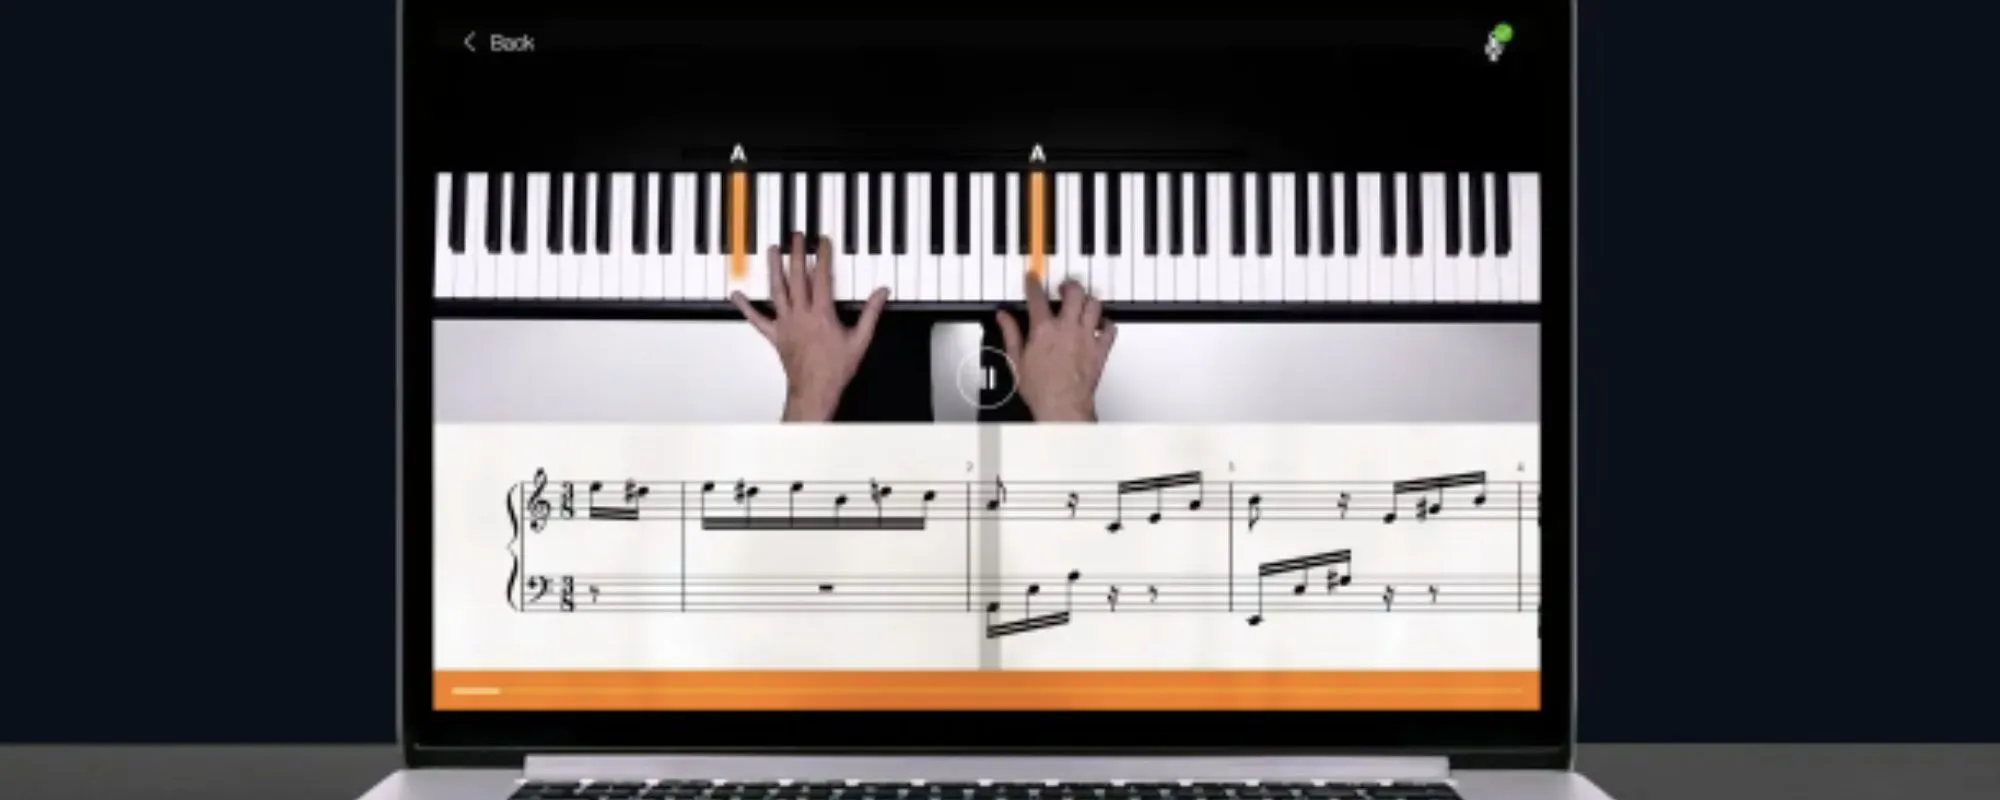 Flowkey Review: Is it Worth it? How does it compare to Simply Piano